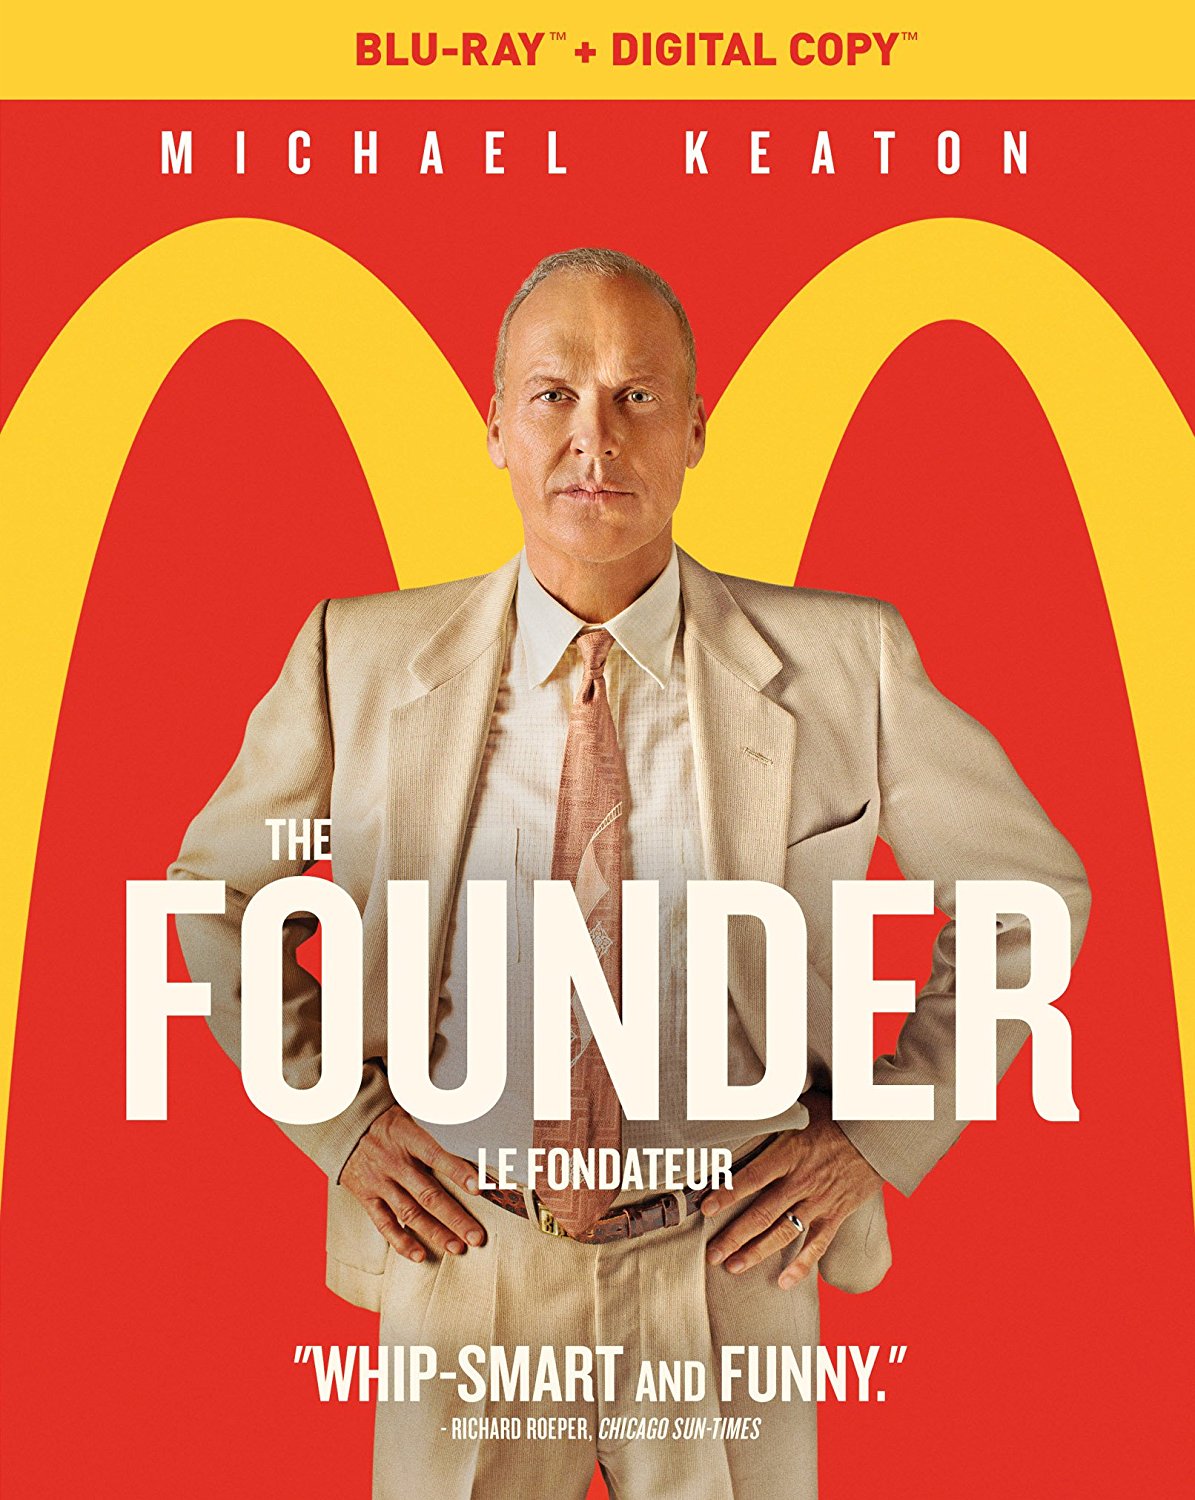 Blu-ray Review: The Founder | One Movie, Our Views